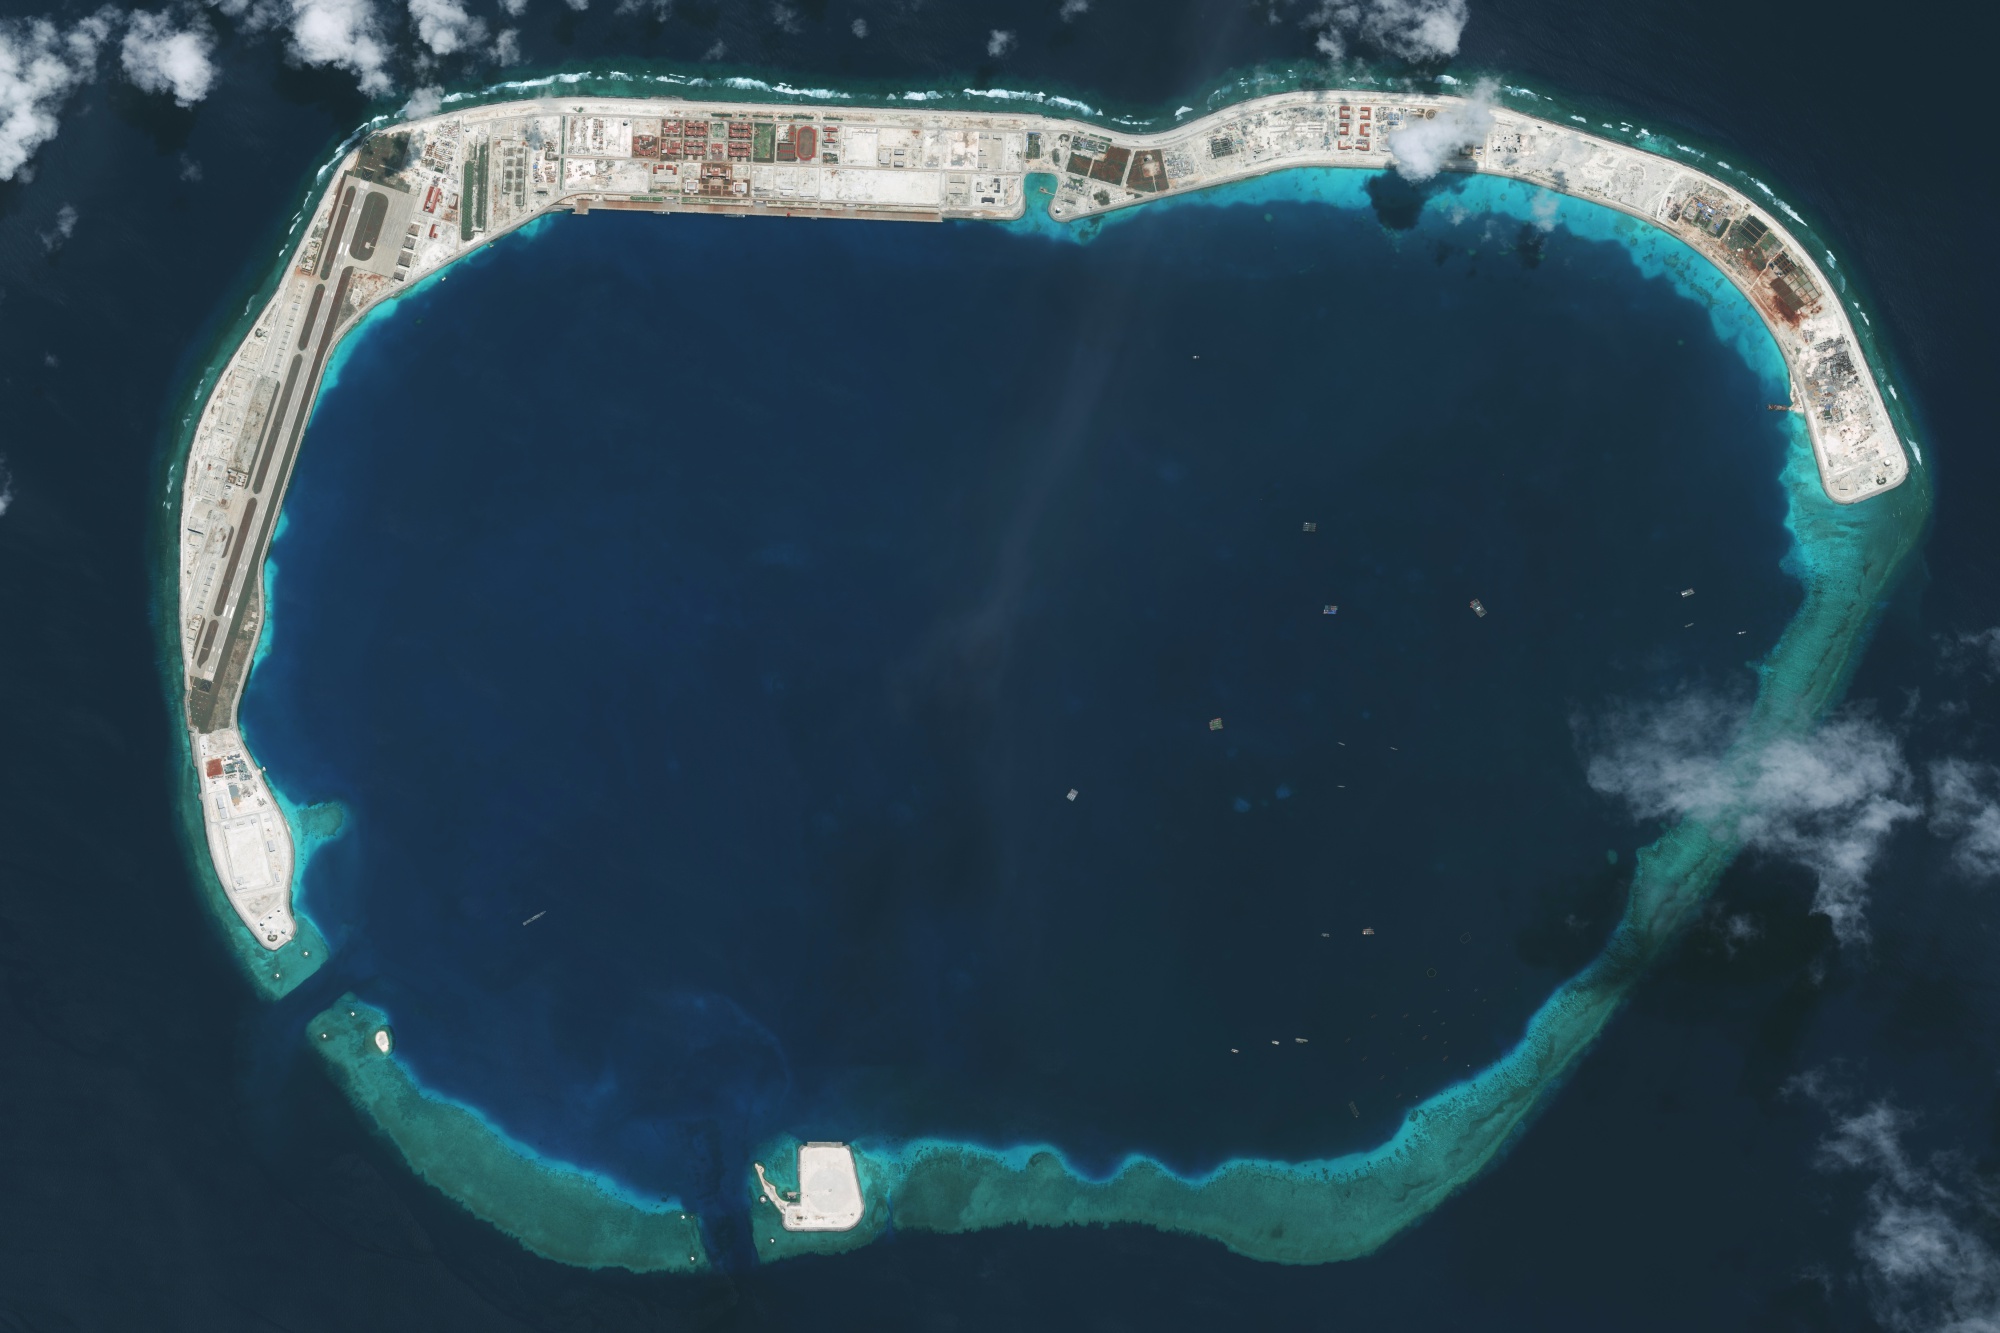 Satellite image of Mischief Reef in the South China Sea in 2018.